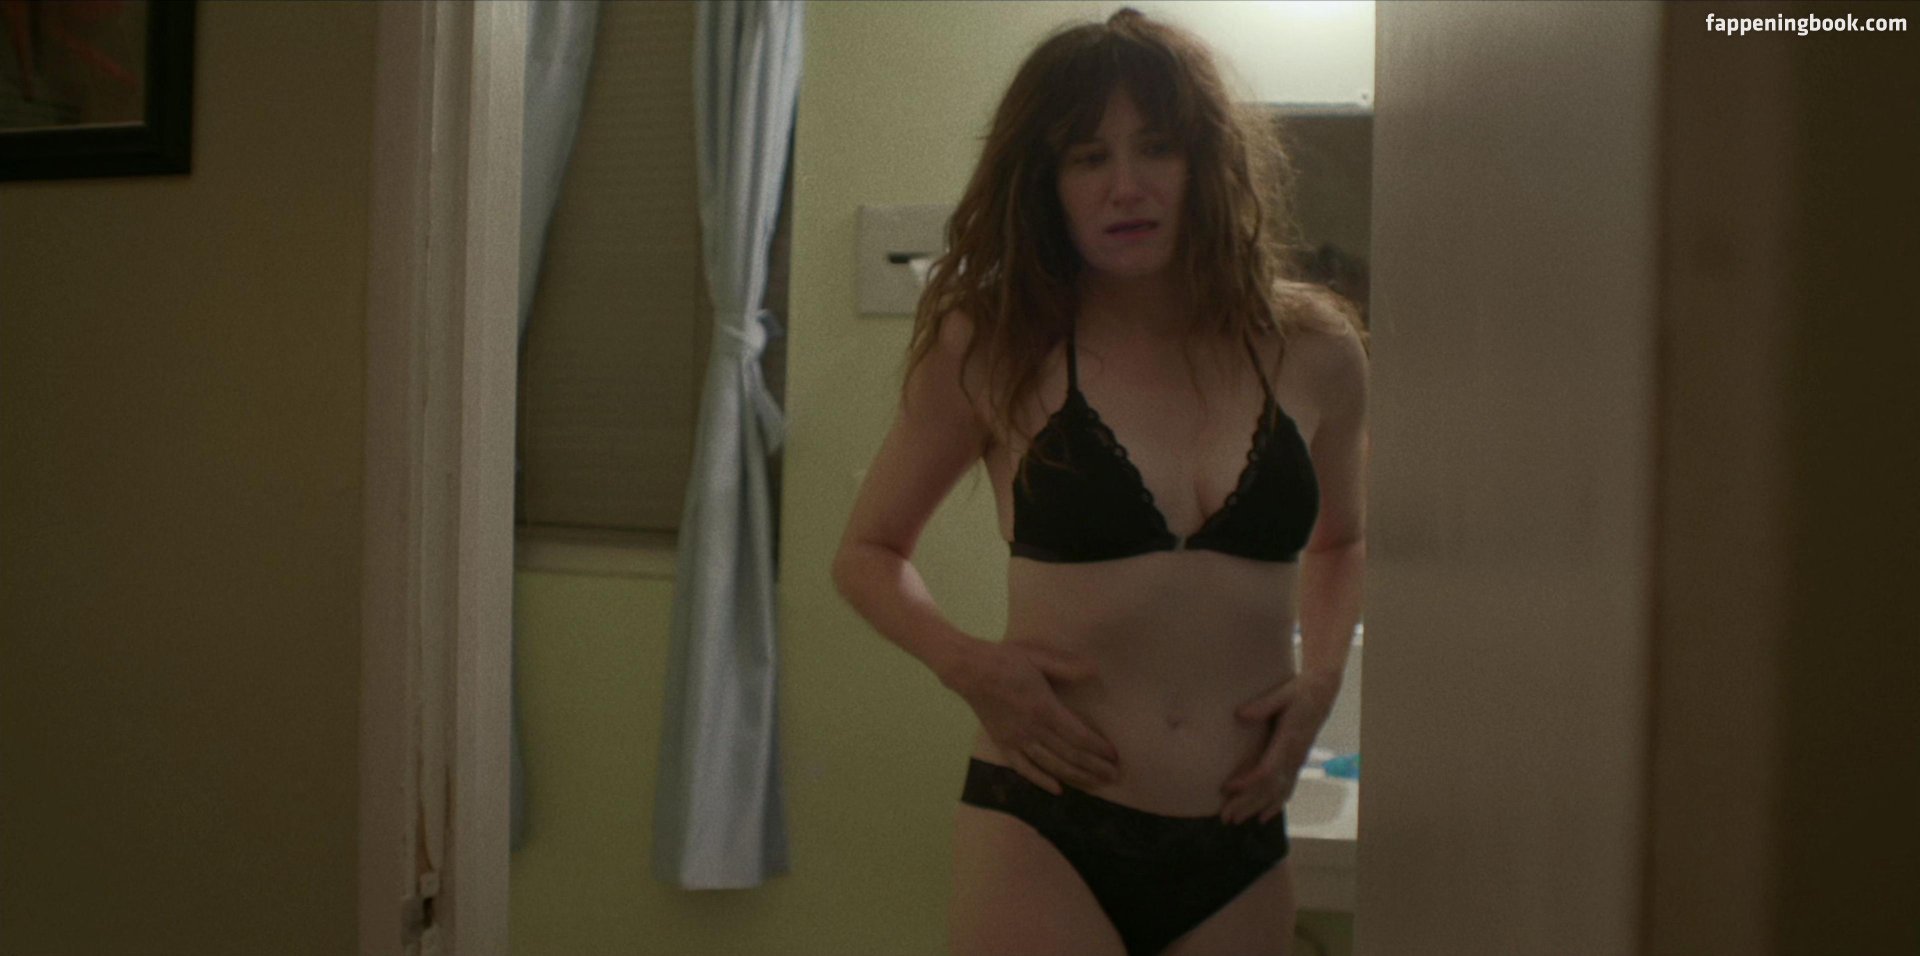 Kathryn Hahn Nude, The Fappening - Photo #290518 - FappeningBook 